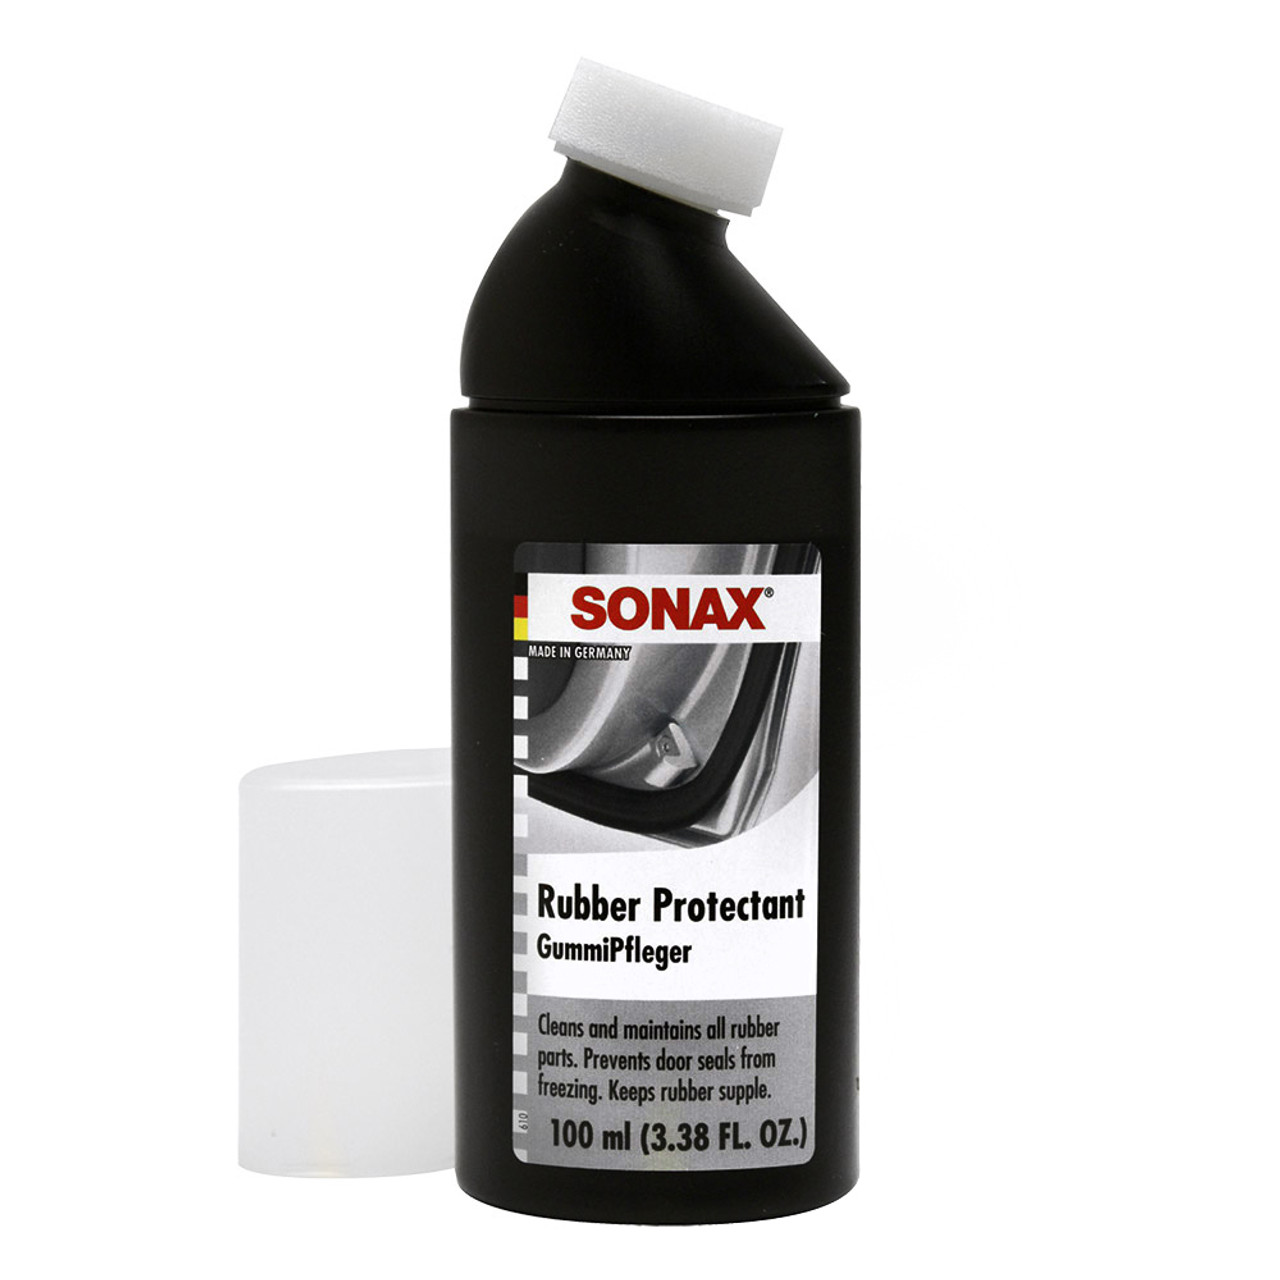 SONAX Anti Freeze and Clear WinterBeast -20°C 3 liters buy online